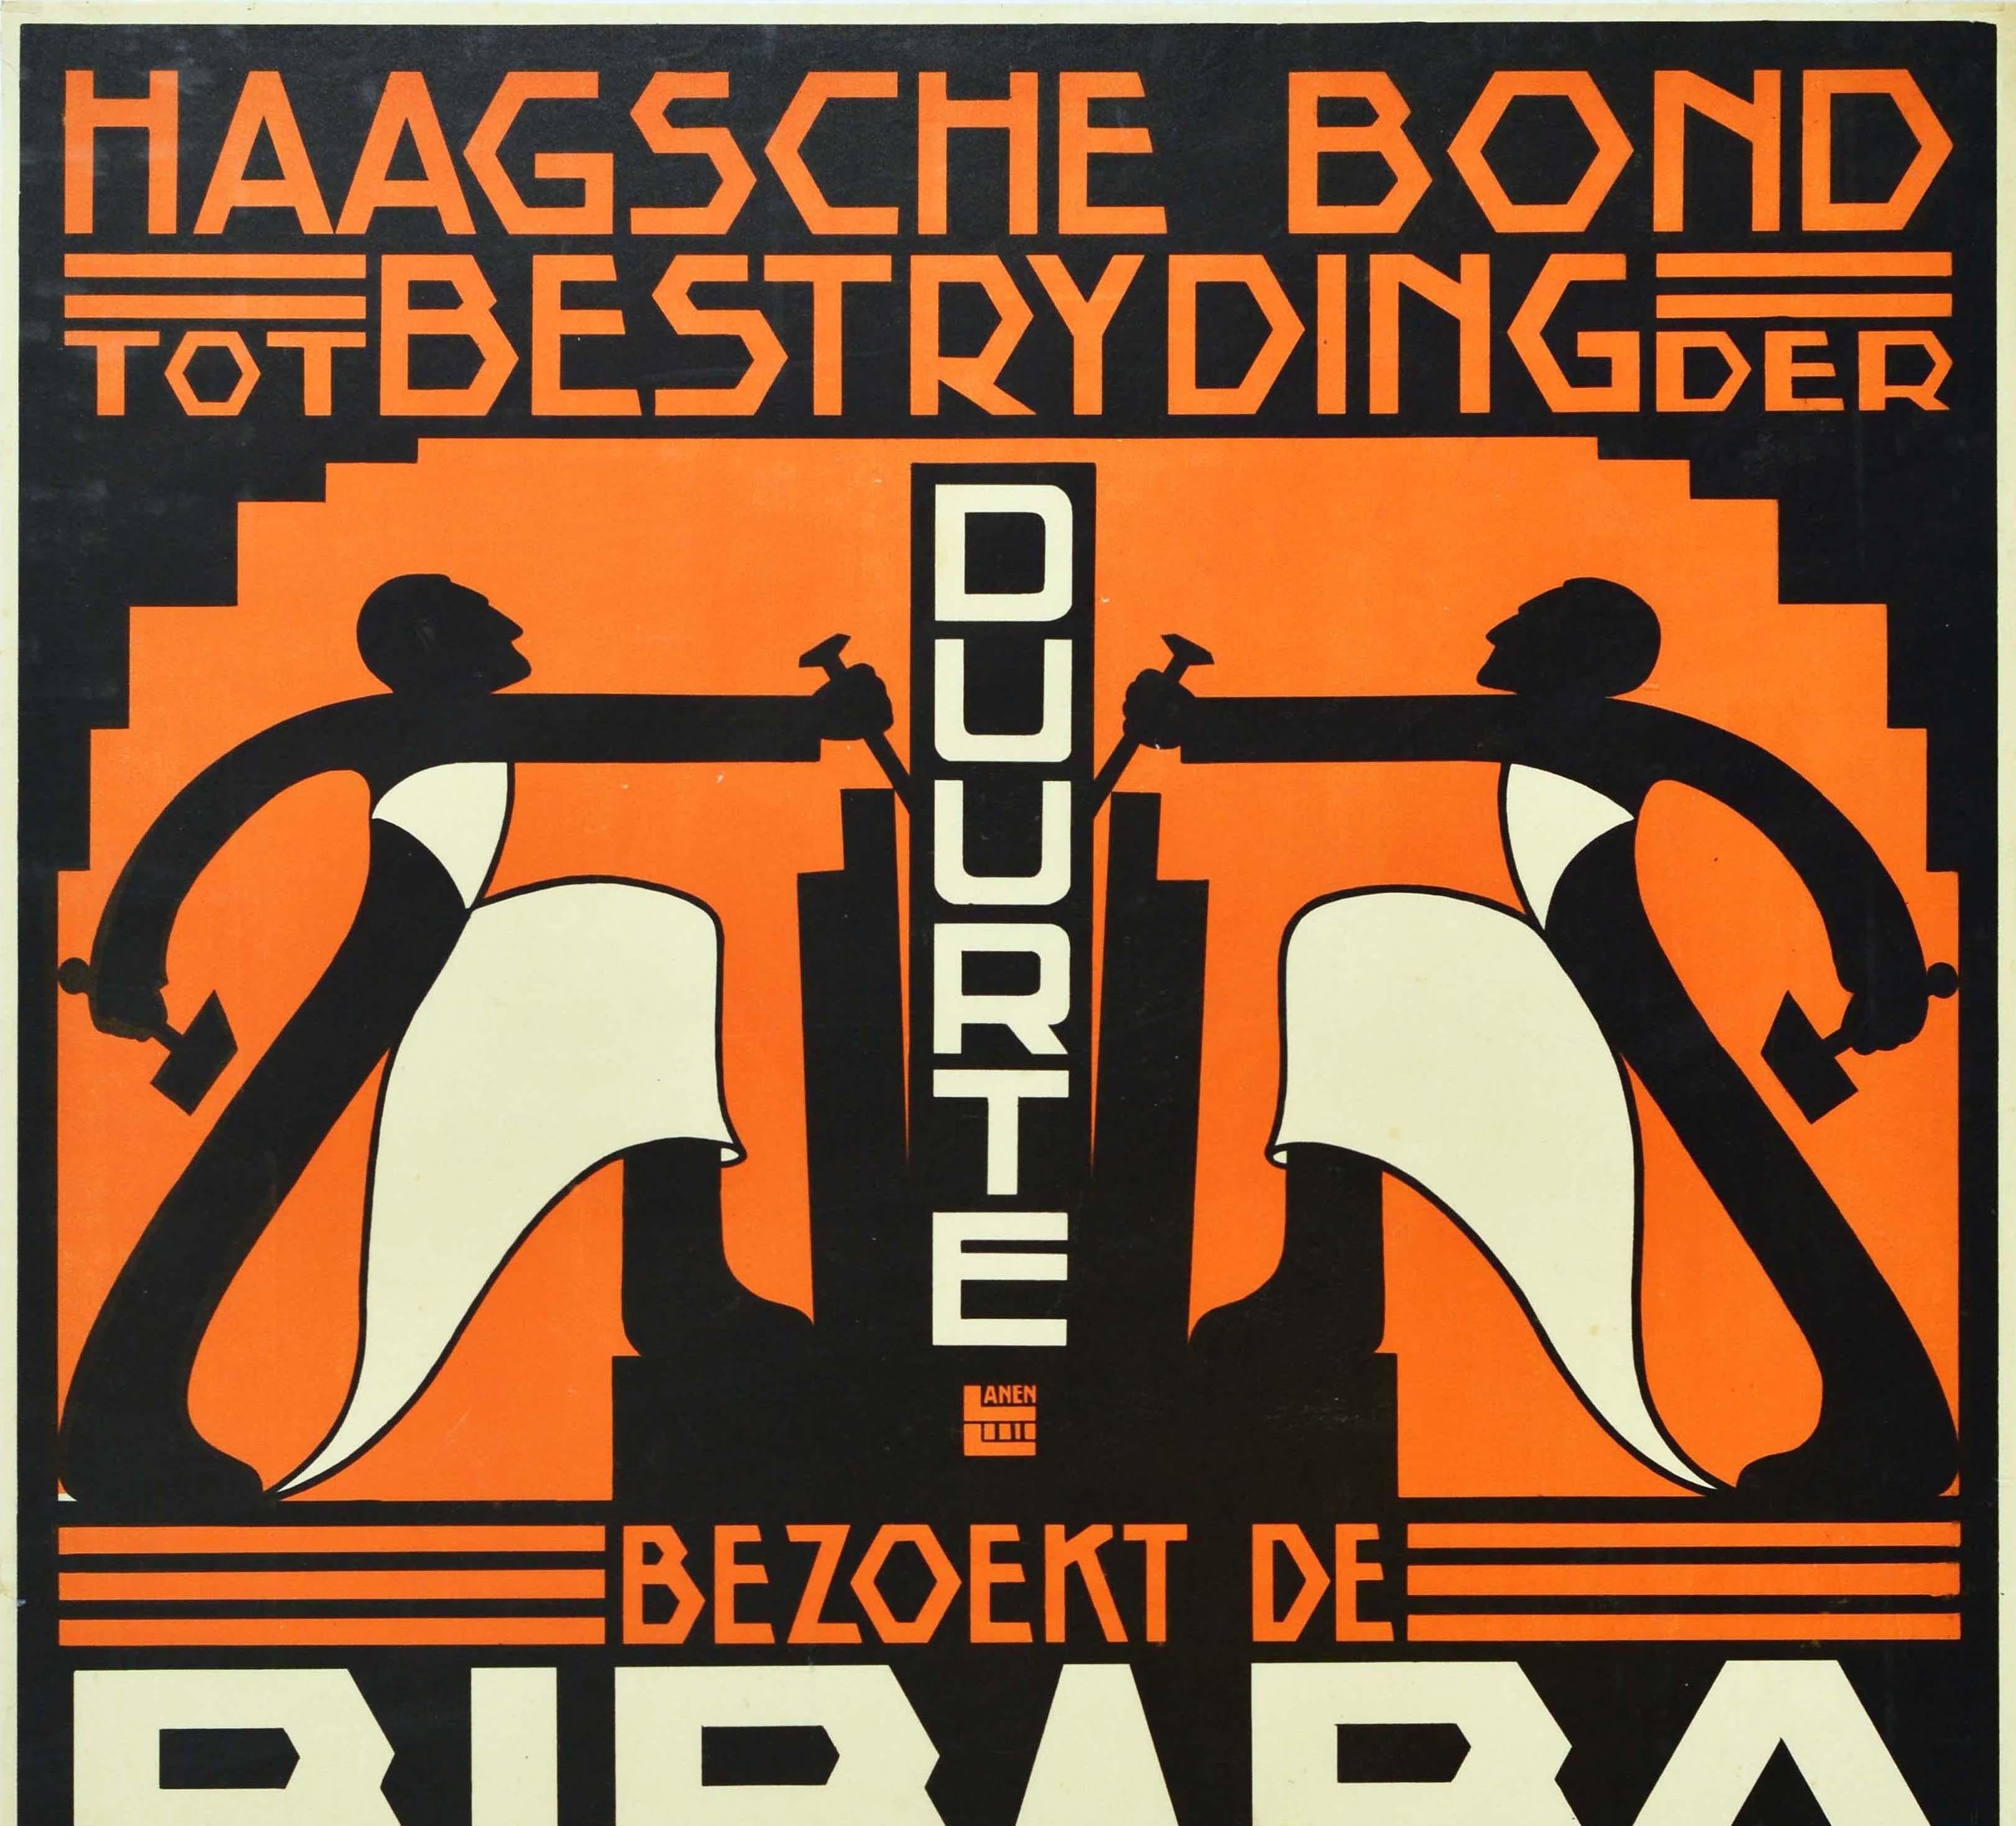 Original antique advertising poster promoting the Bibabo fair in 1921 featuring a dynamic Art Deco style image of two workers in white aprons holding a nail and hammer in each hand with the bold orange and white stylised text on the black background